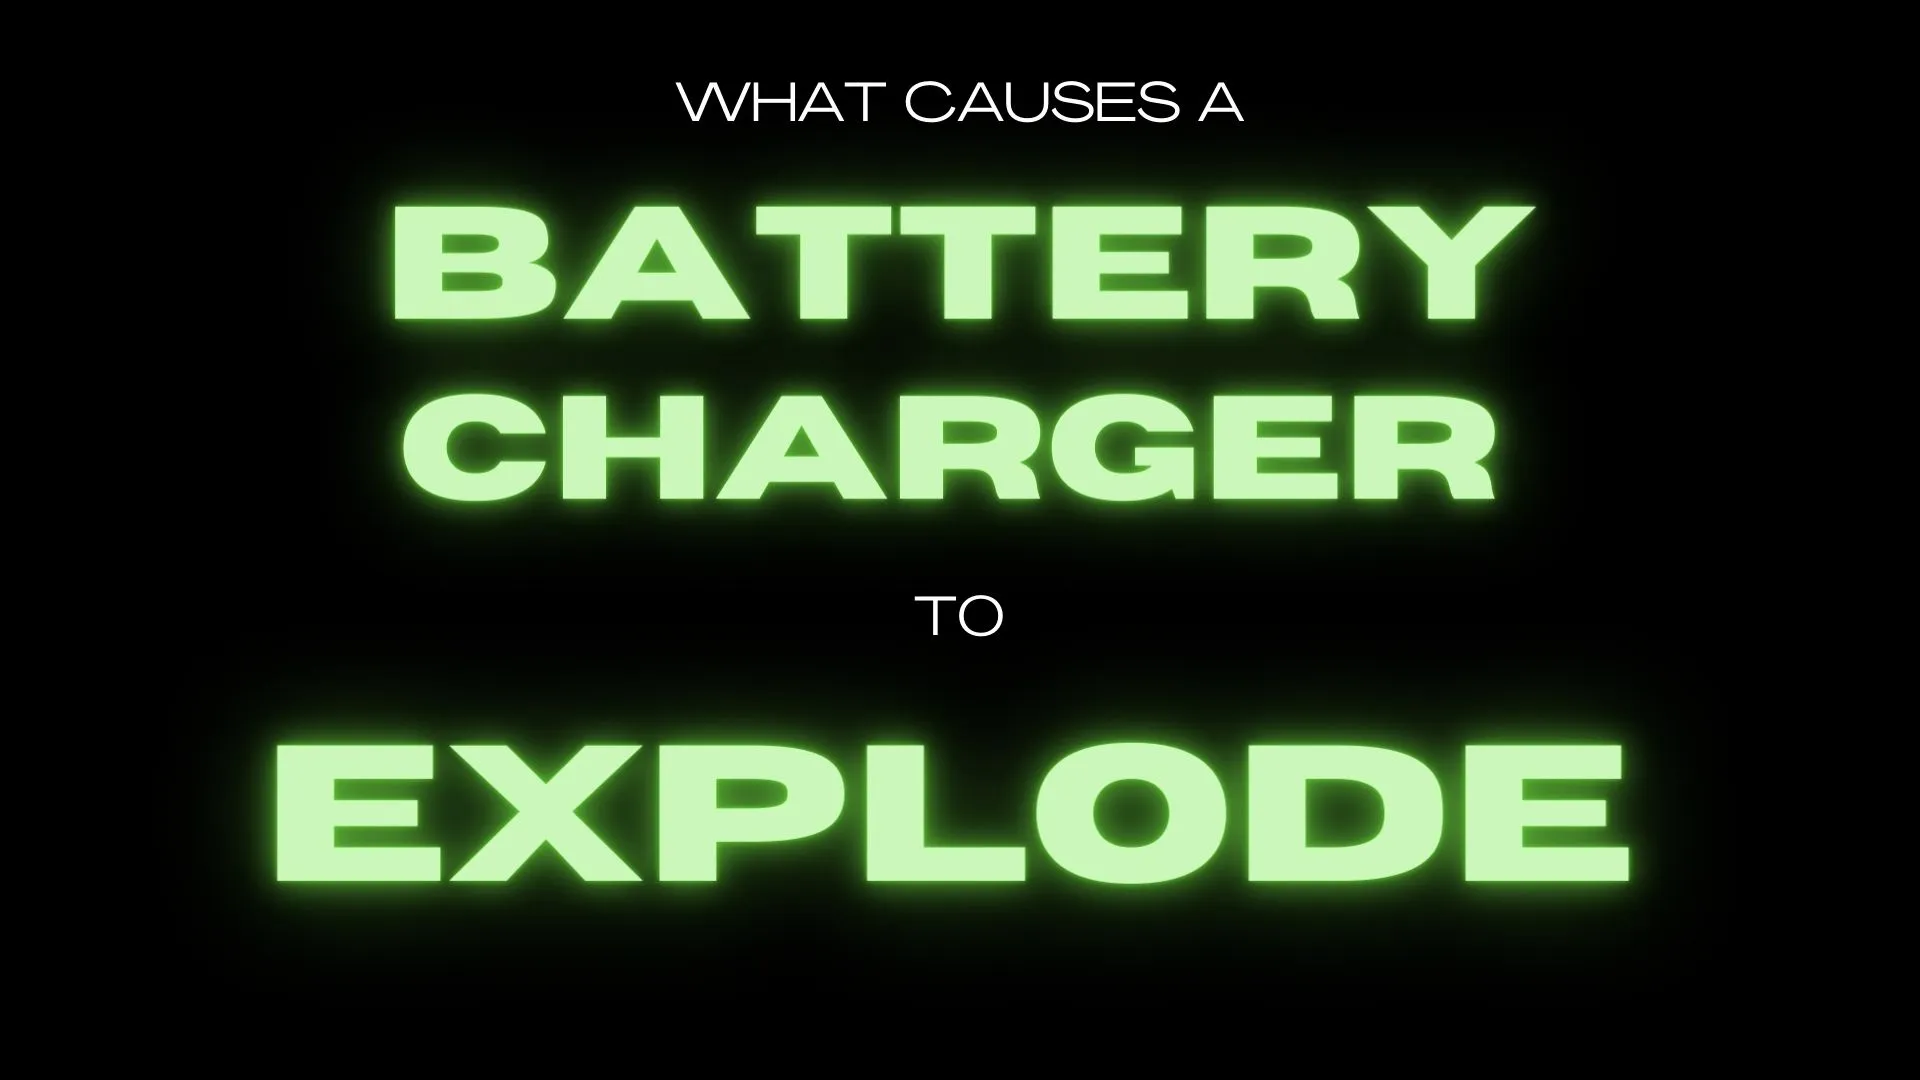 What causes a battery charger to explode